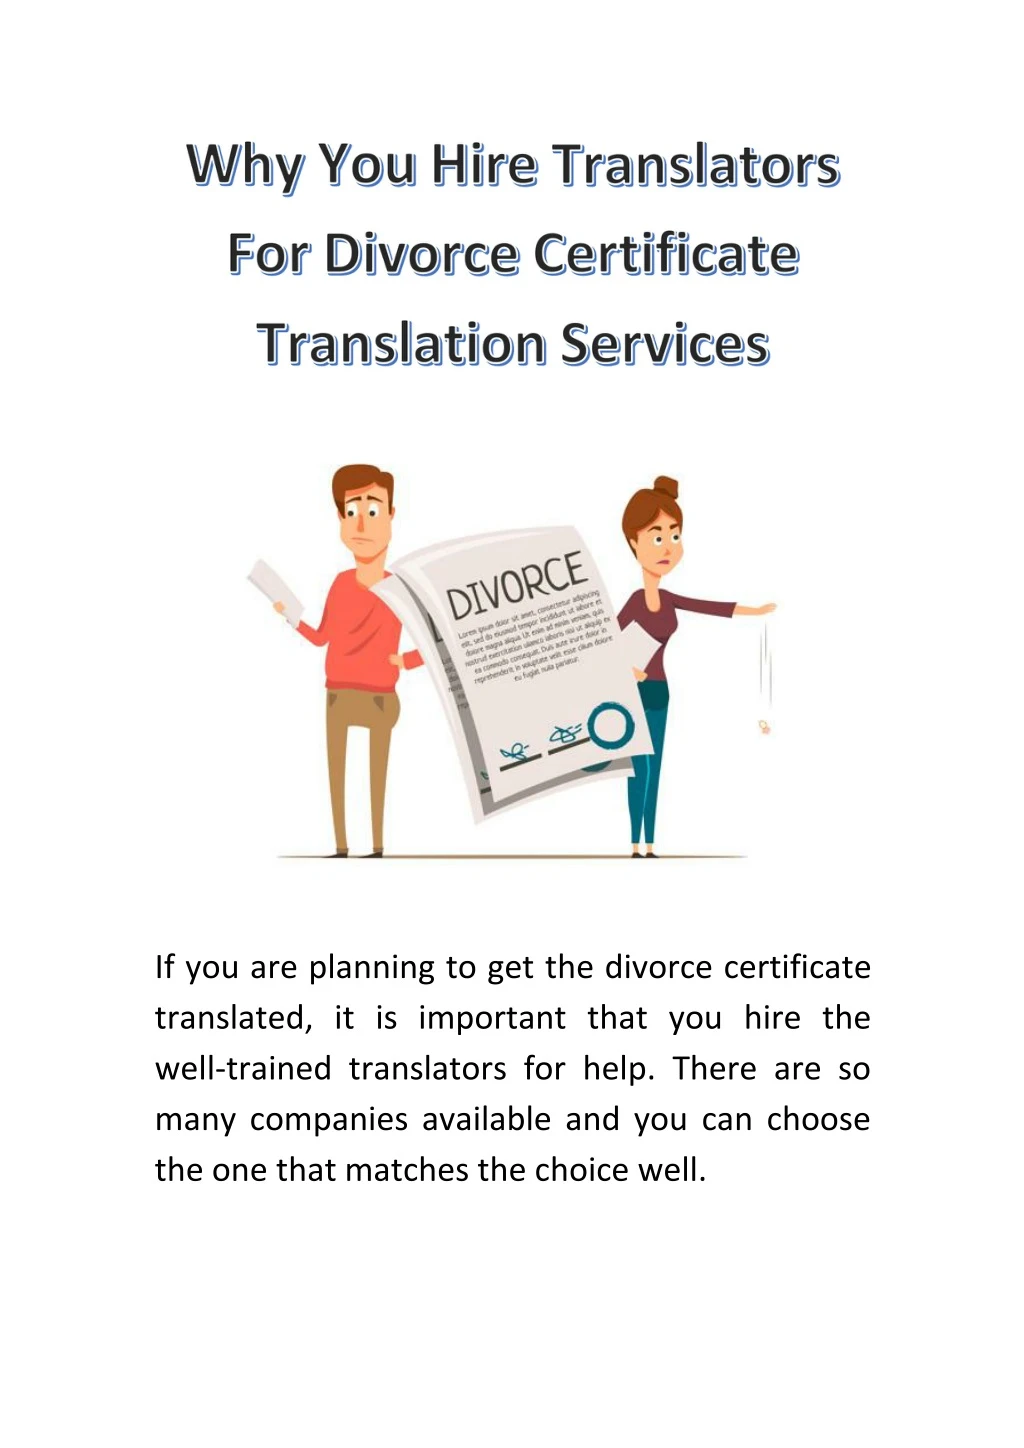 if you are planning to get the divorce